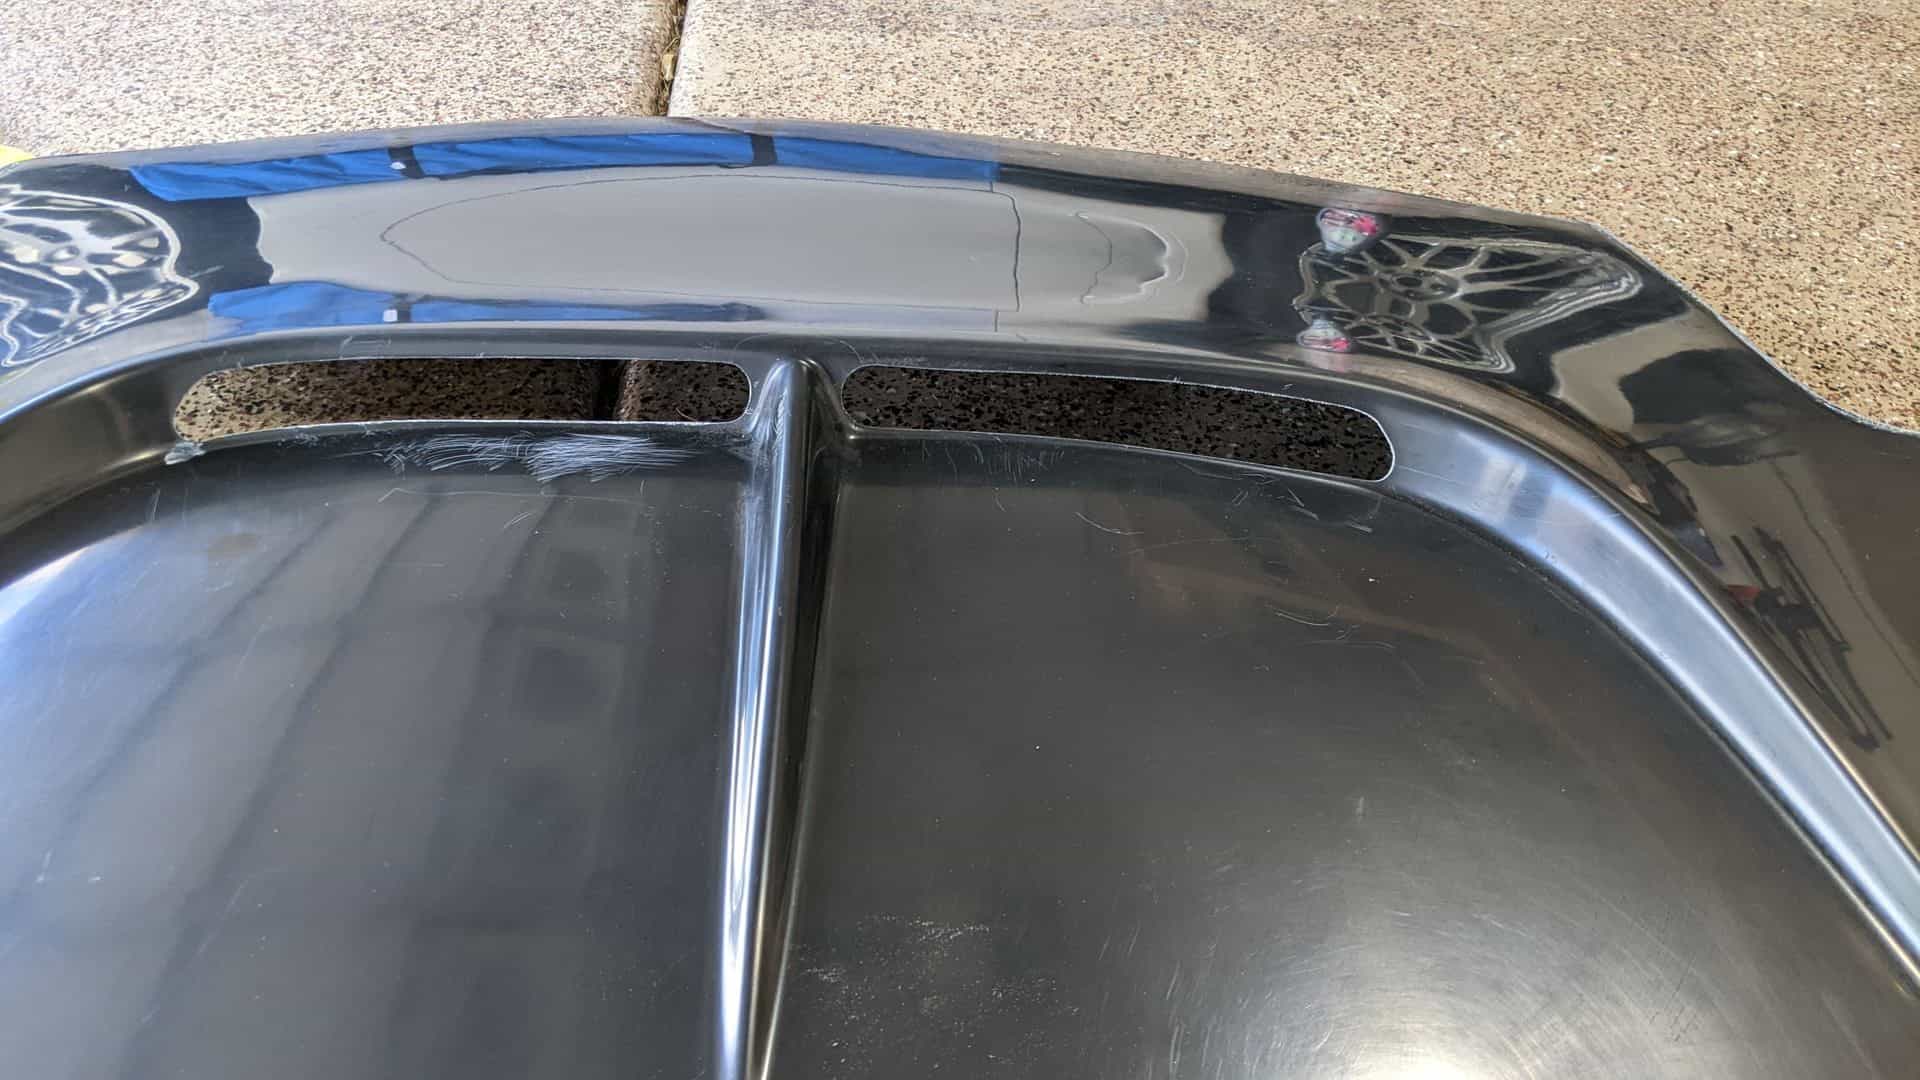 Exterior Body Parts - Fiberglass Ronin Reverse cowl hood (Mazdaspeed design) for the FD - New - 1992 to 2001 Mazda RX-7 - Las Vegas, NV 89119, United States